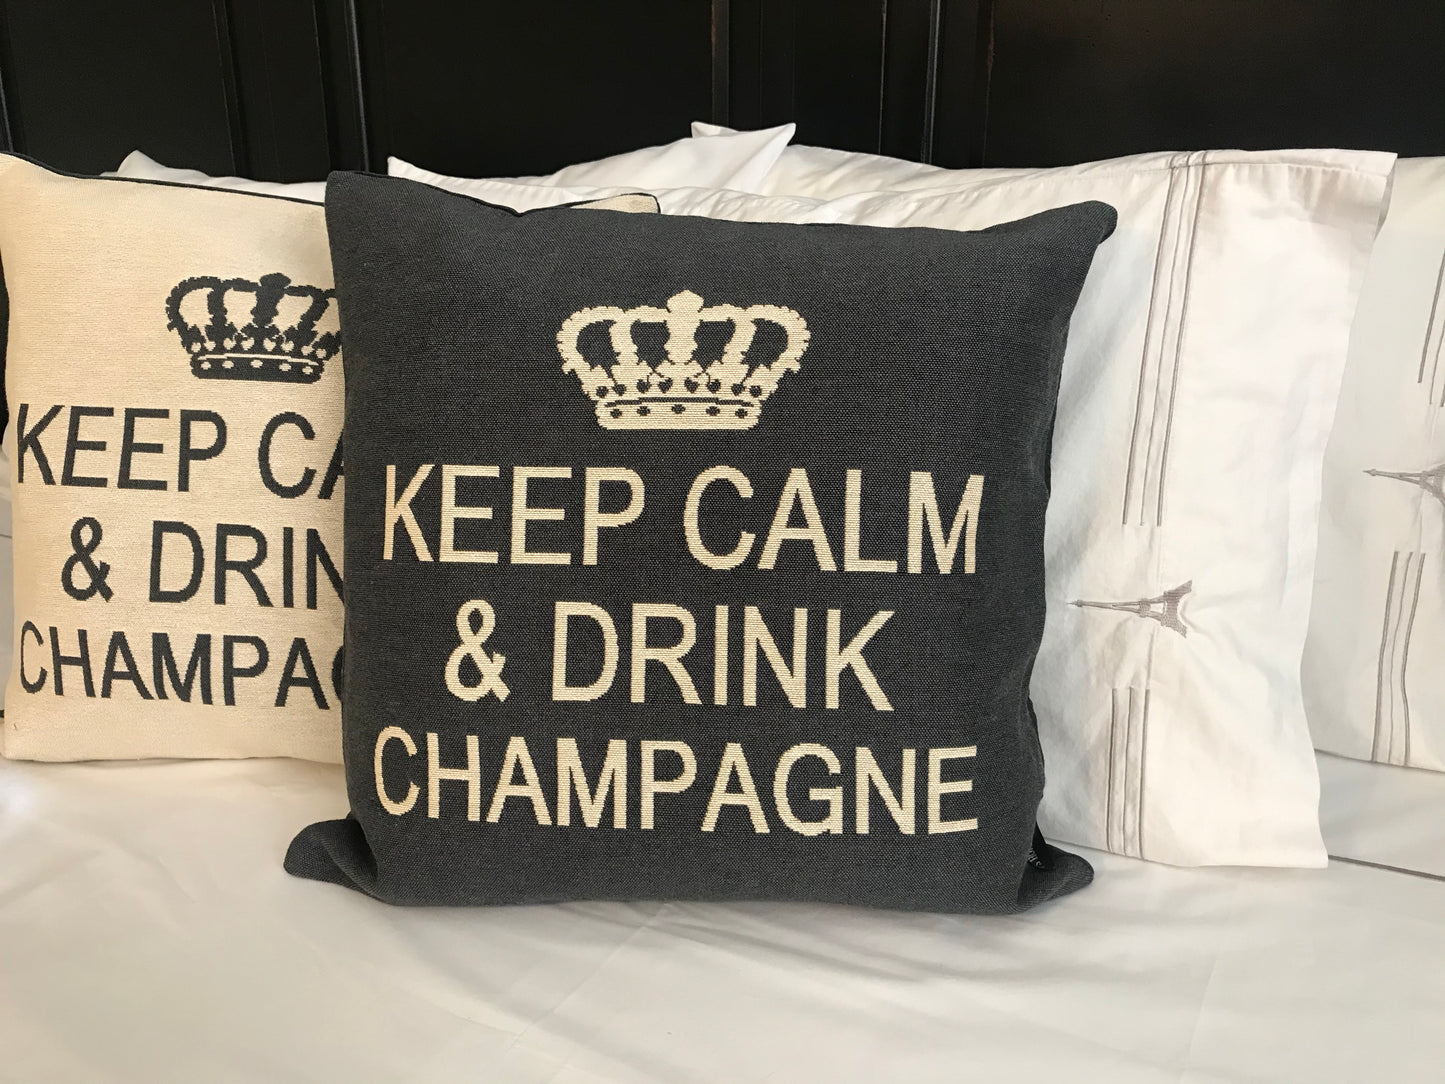 Keep Calm and Drink Champagne Decorative Pillow Cover - (Cream and Charcoal)